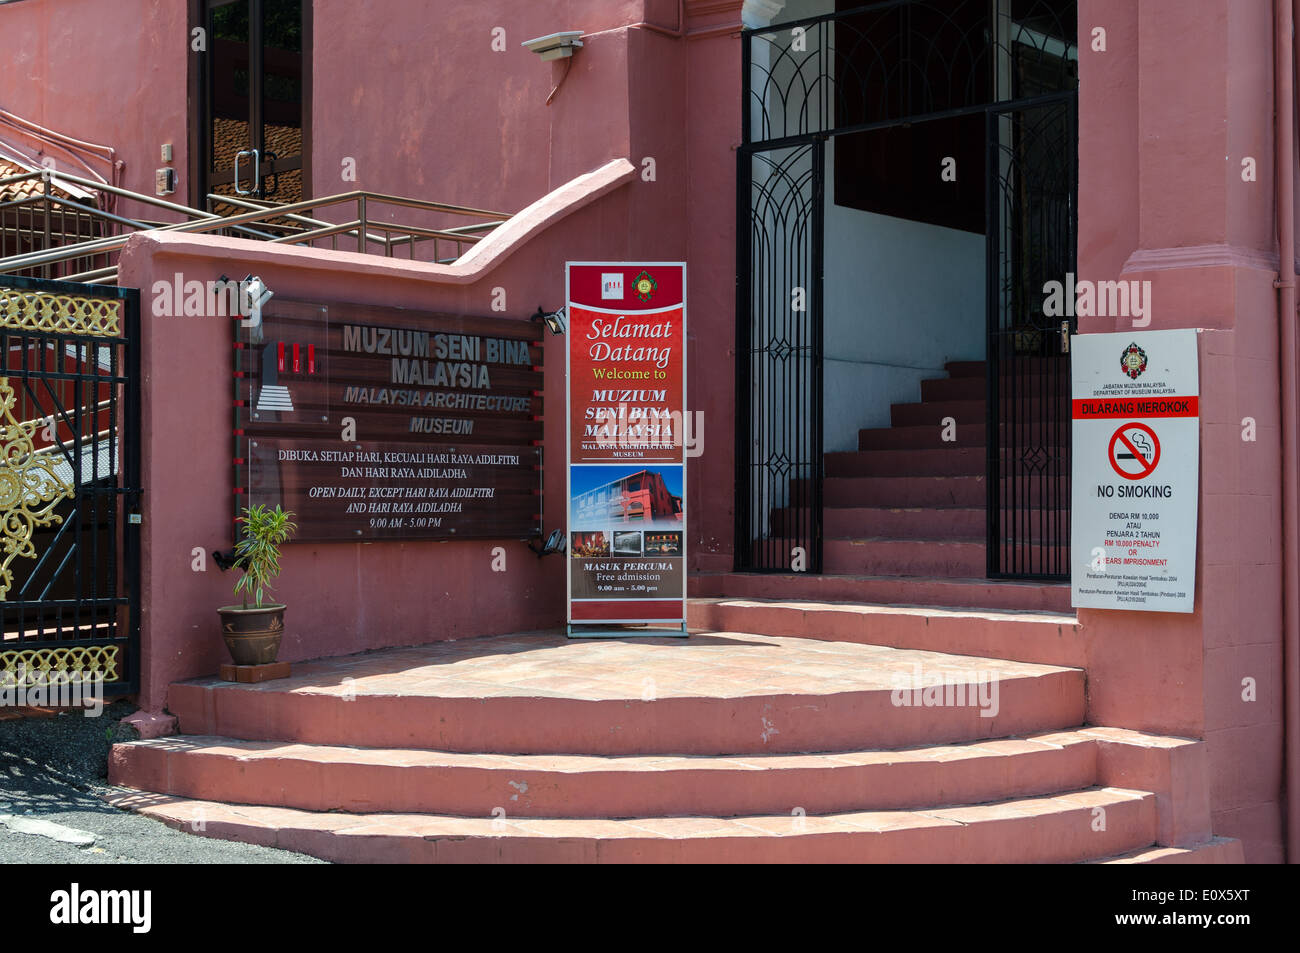 Entrance to the Malaysian Architecture Museum in the Malaysian city of Malacca Stock Photo